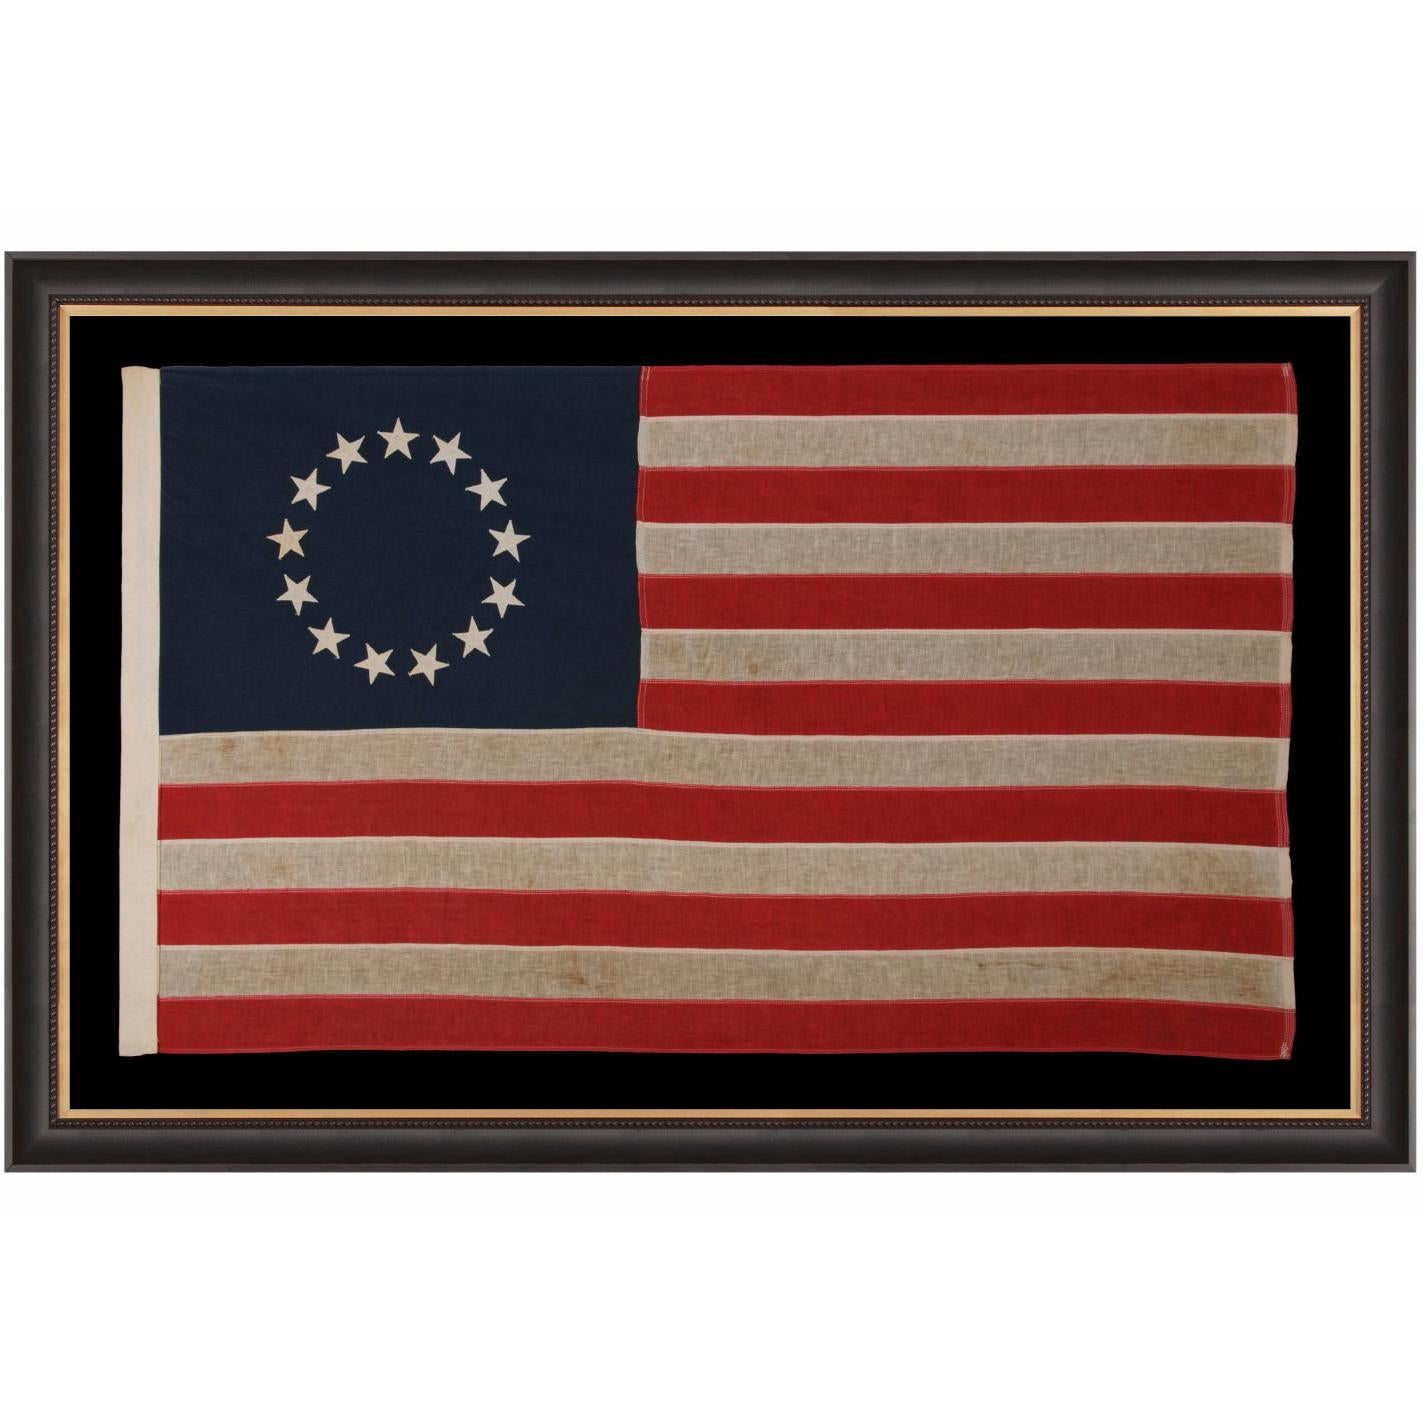 13 Stars In a Betsy Ross Pattern on a Small Scale American Flag, 1900-1930